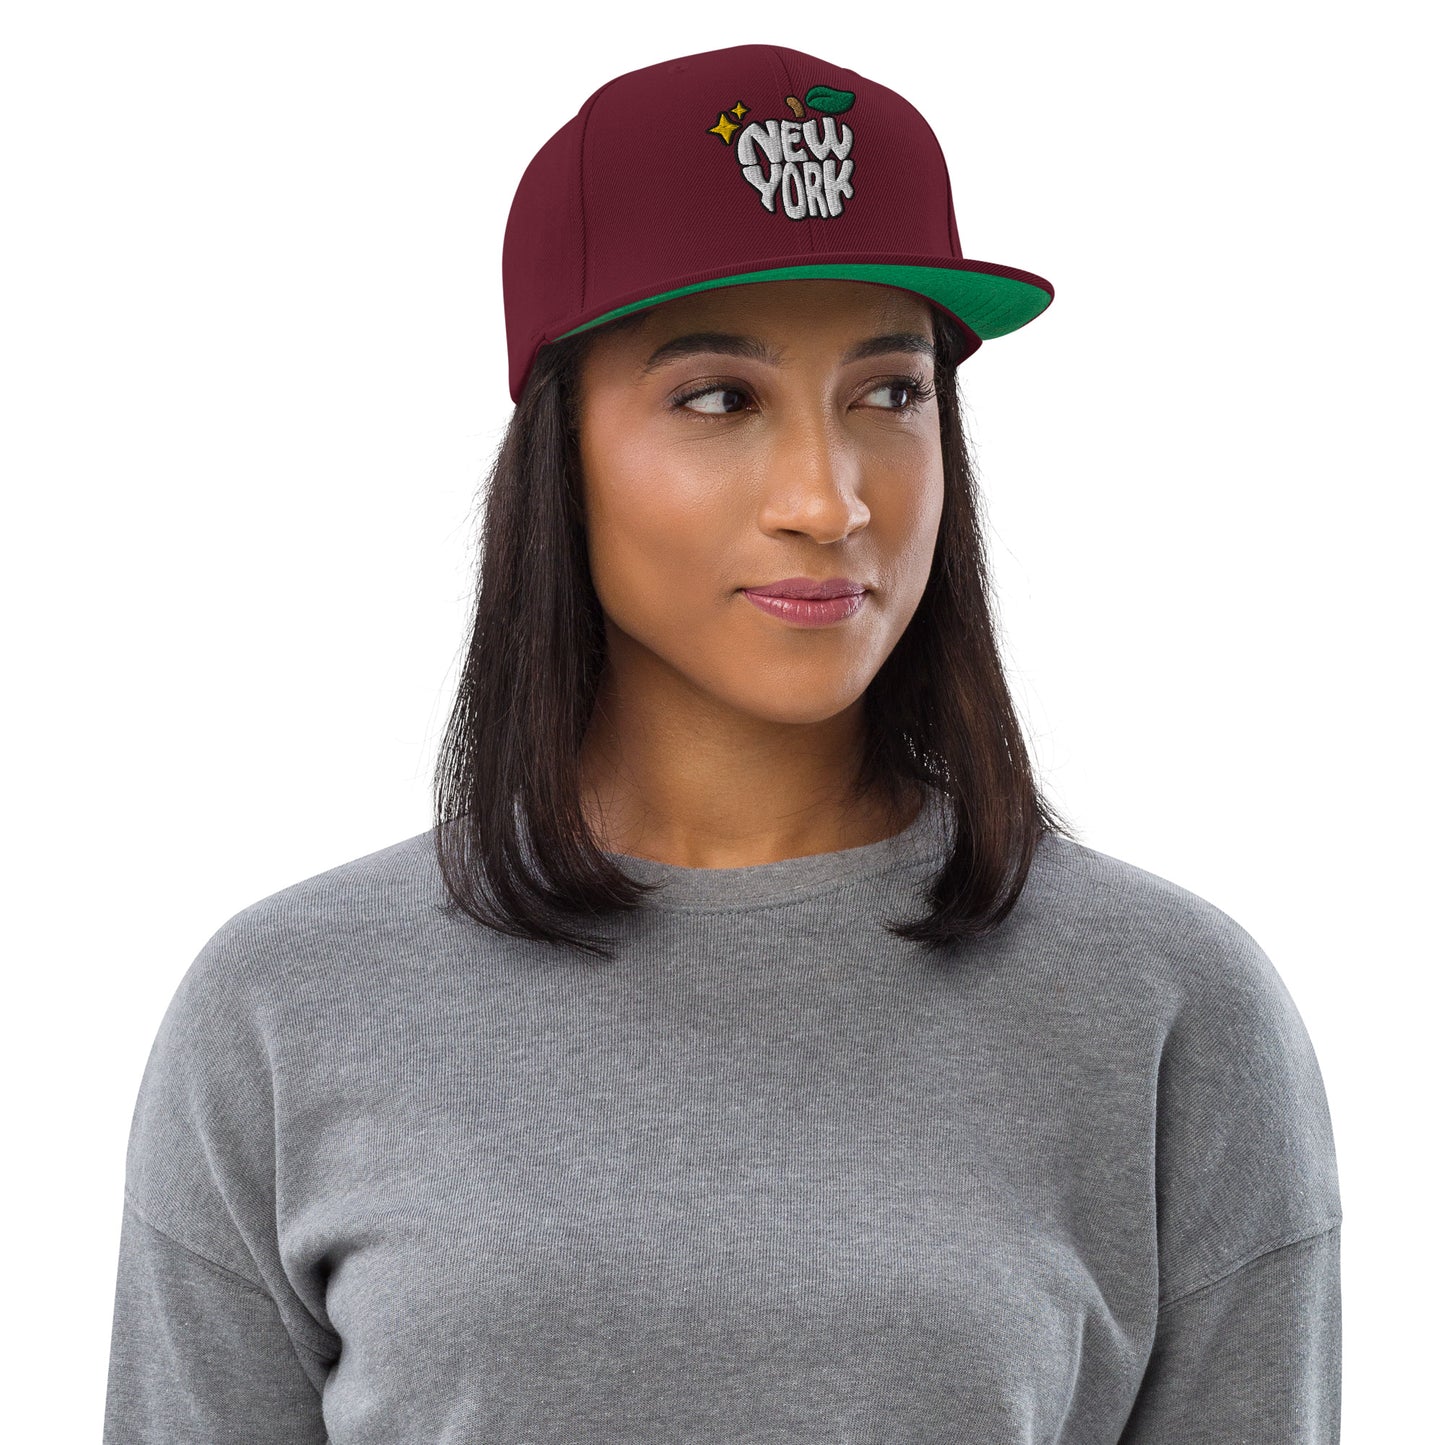 New York Apple Logo Embroidered Burgundy Snapback Hat (Pizza) Scattered Streetwear